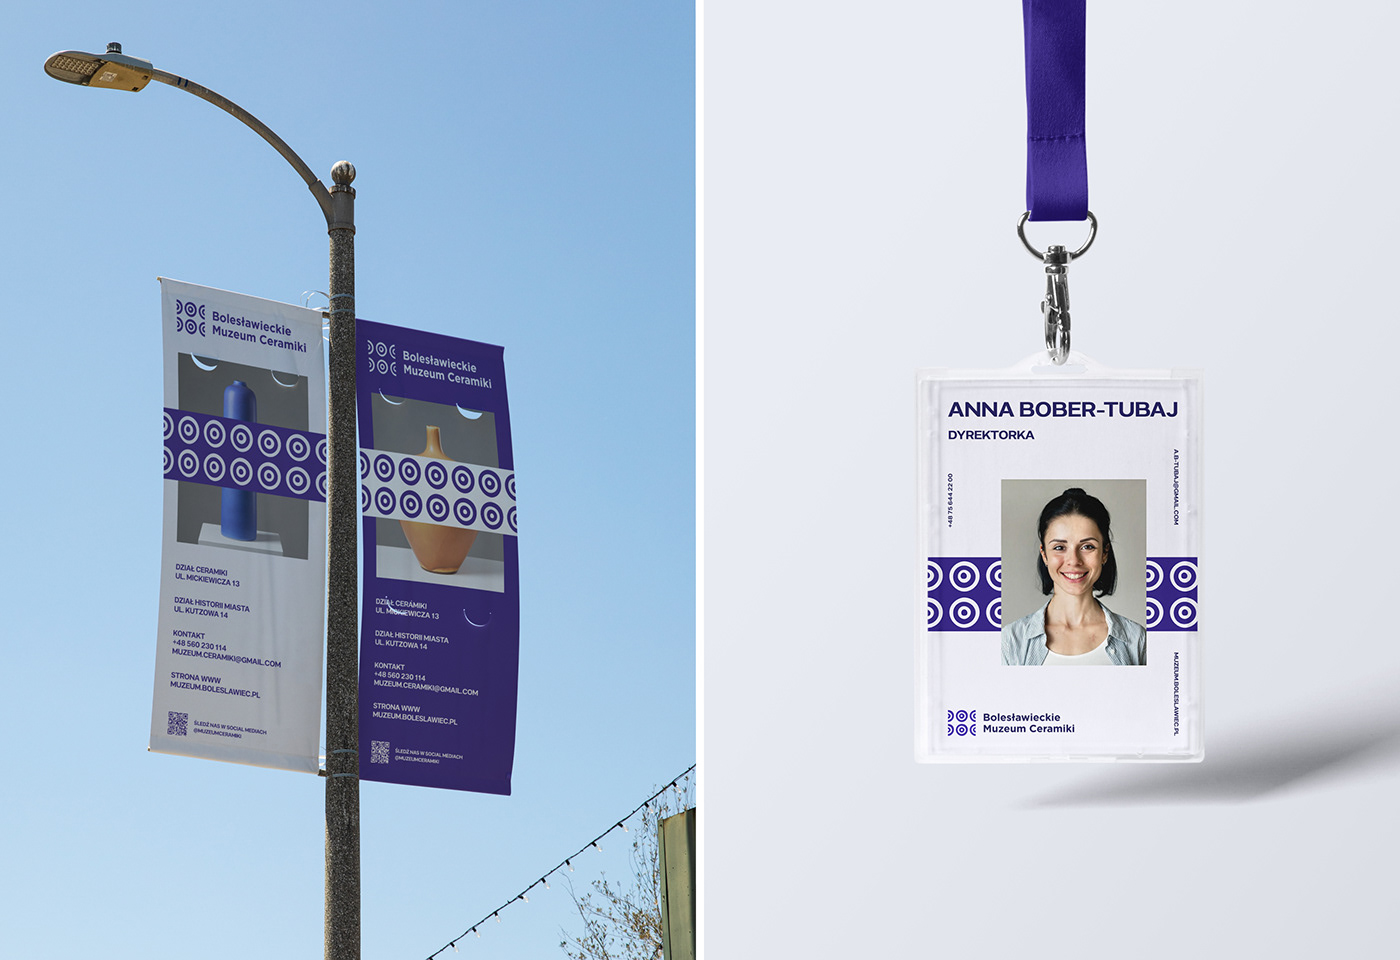 on the left flags promoting museum of ceramics in bolesławiec, on the right ID card 